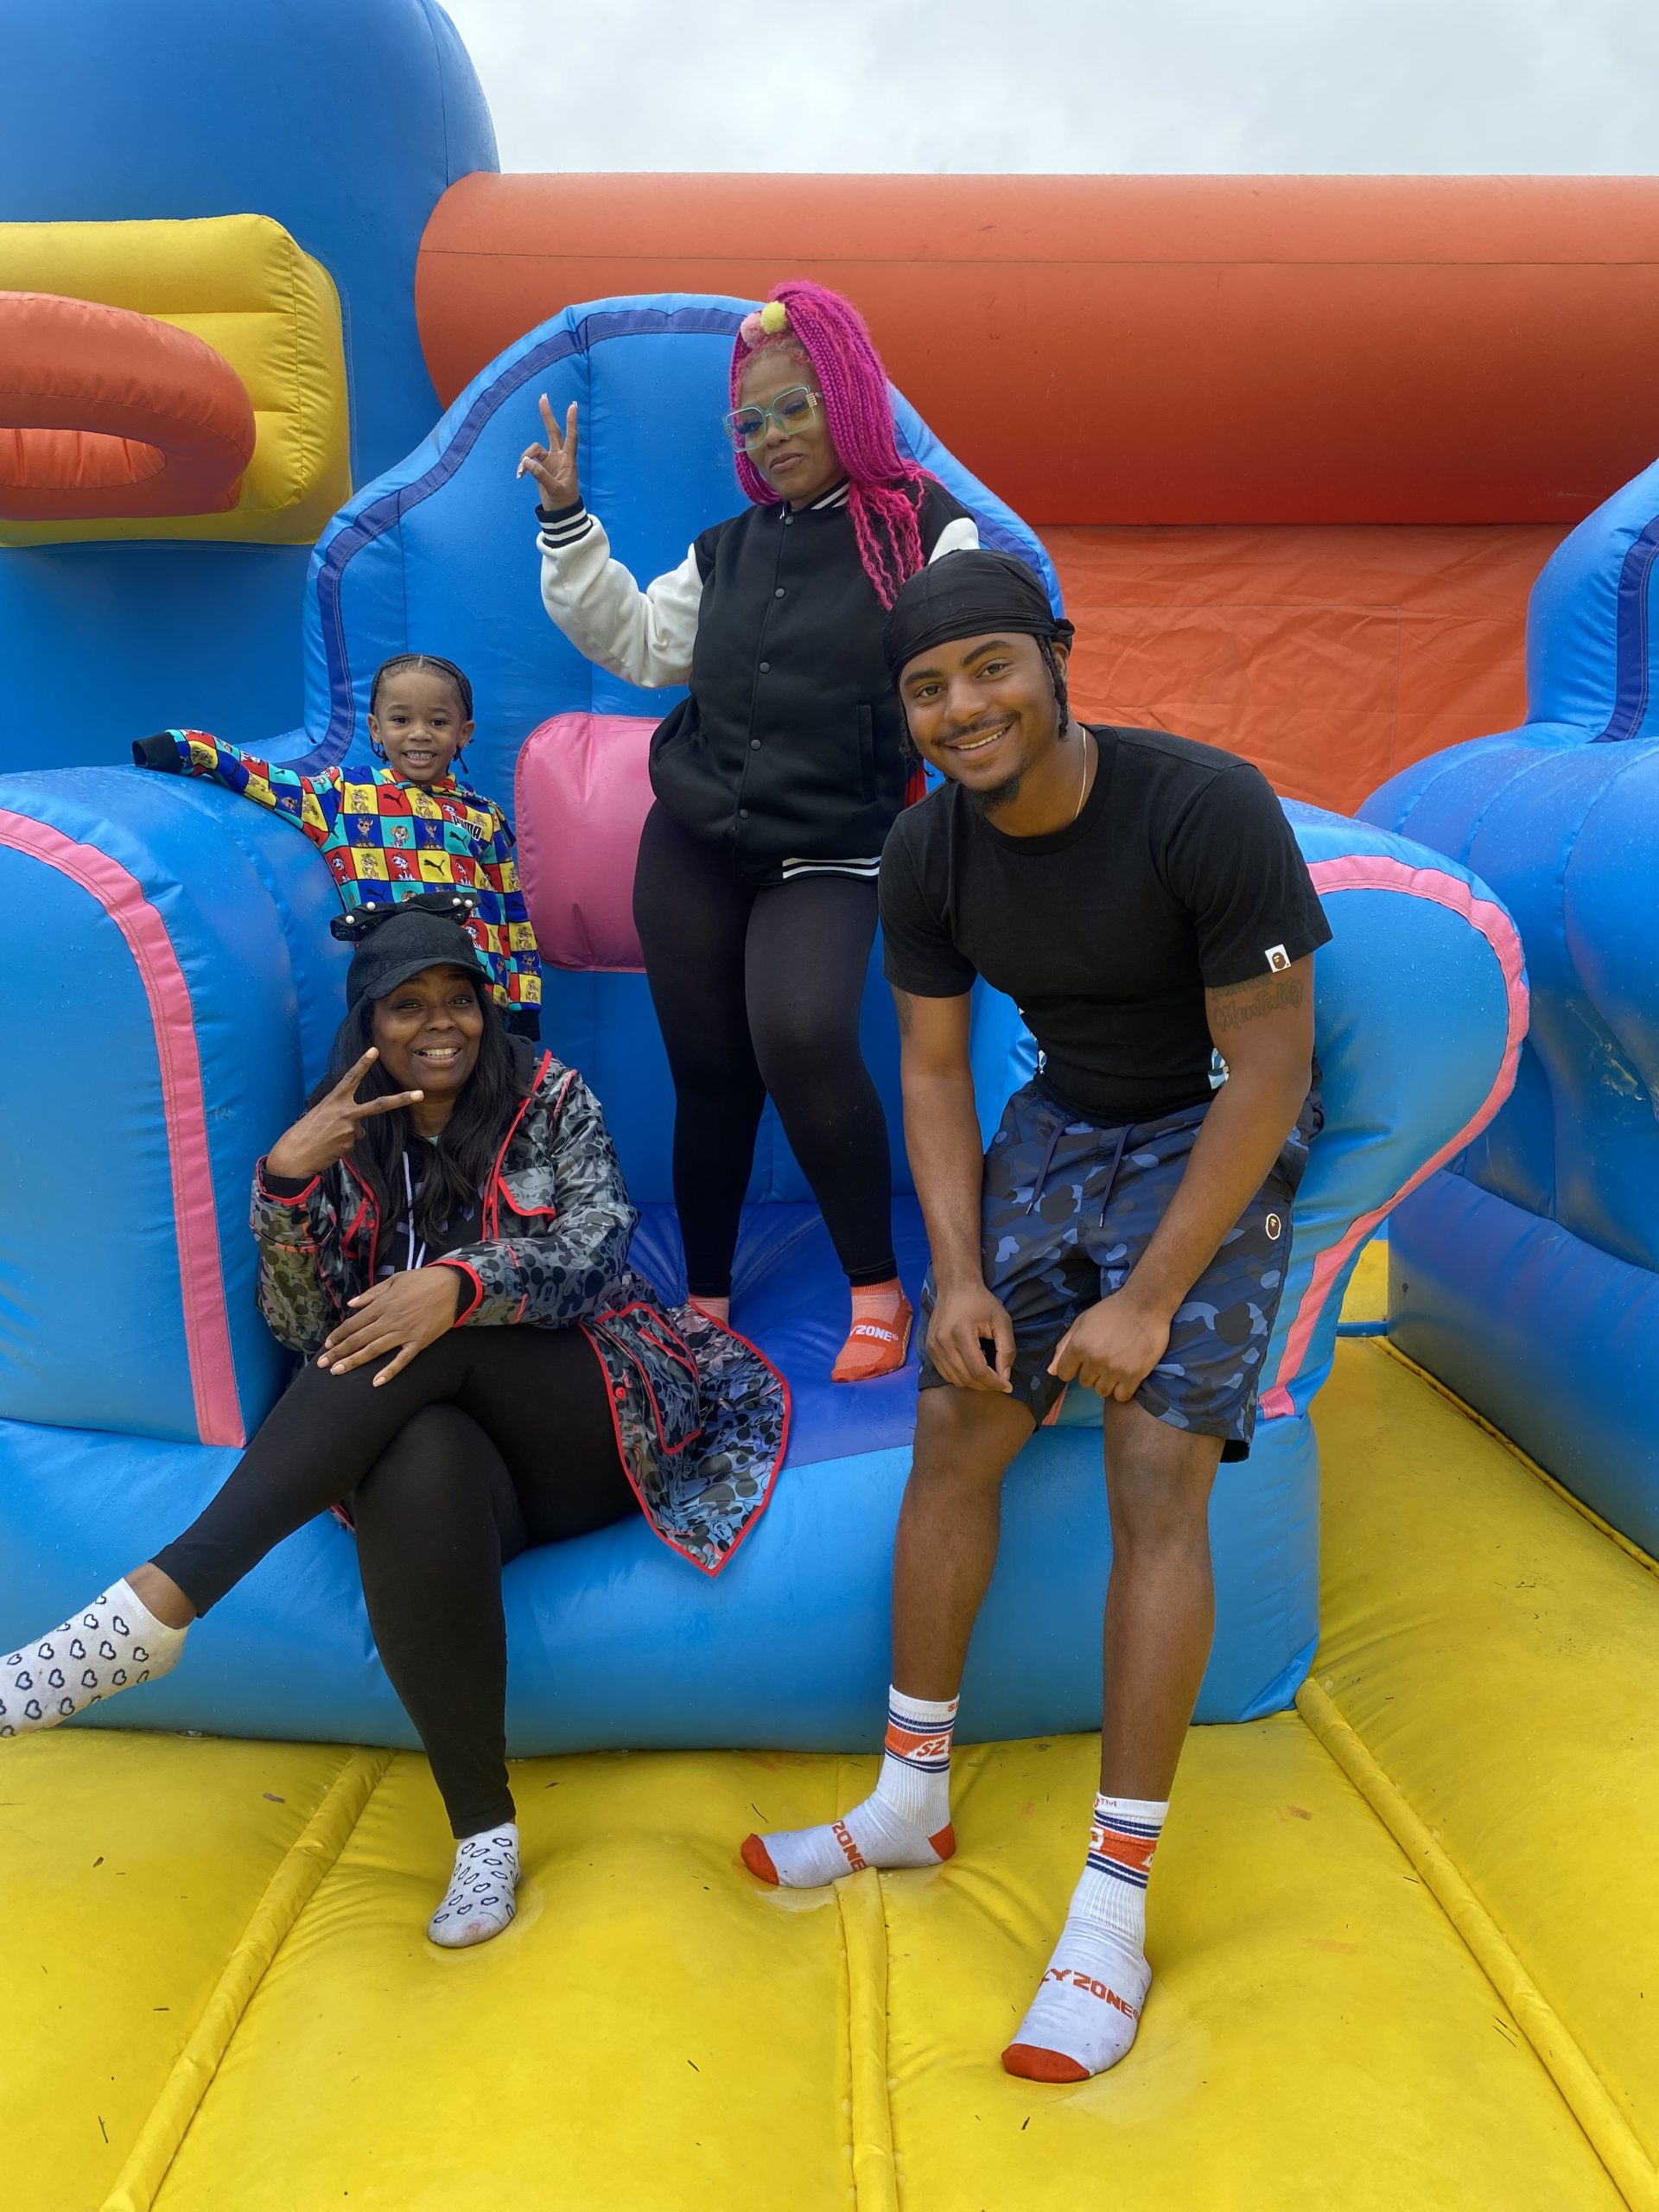 Legend Turns 4, Celebrates At ‘The Big Bounce America’